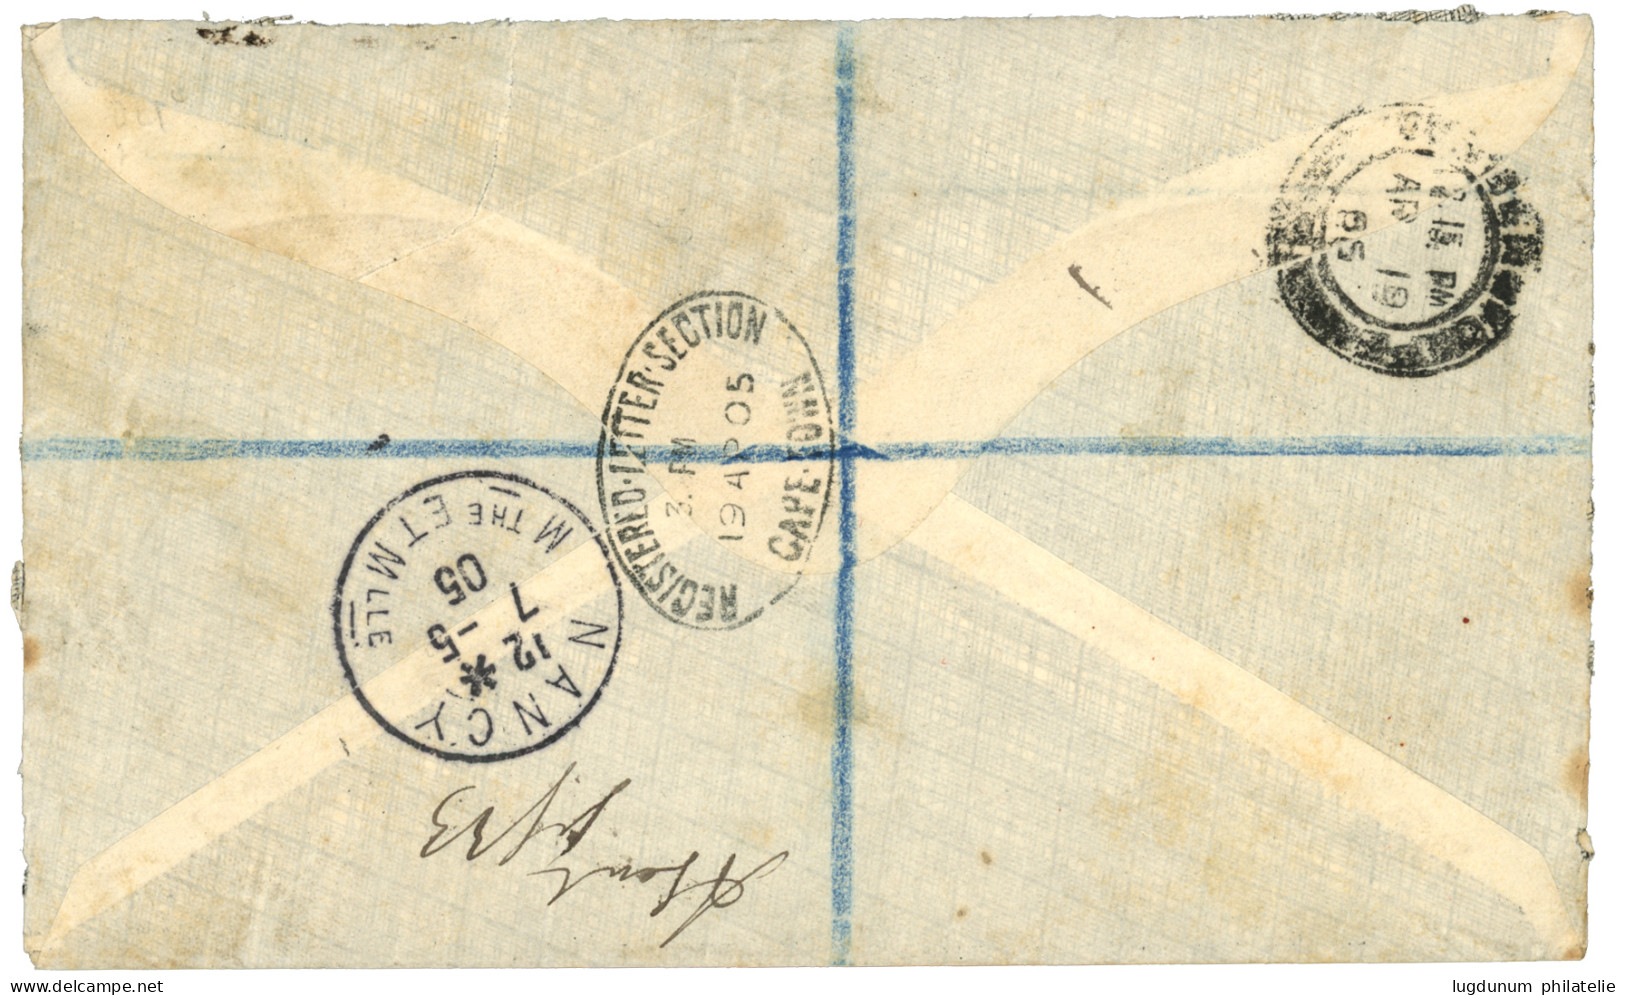 CAPE OF GOOD HOPE : 1905 1d+ 4d + 6d (2 Different Issues) Canc. CONSTANTIA CGH On Cover To FRANCE. Vf. - Cape Of Good Hope (1853-1904)